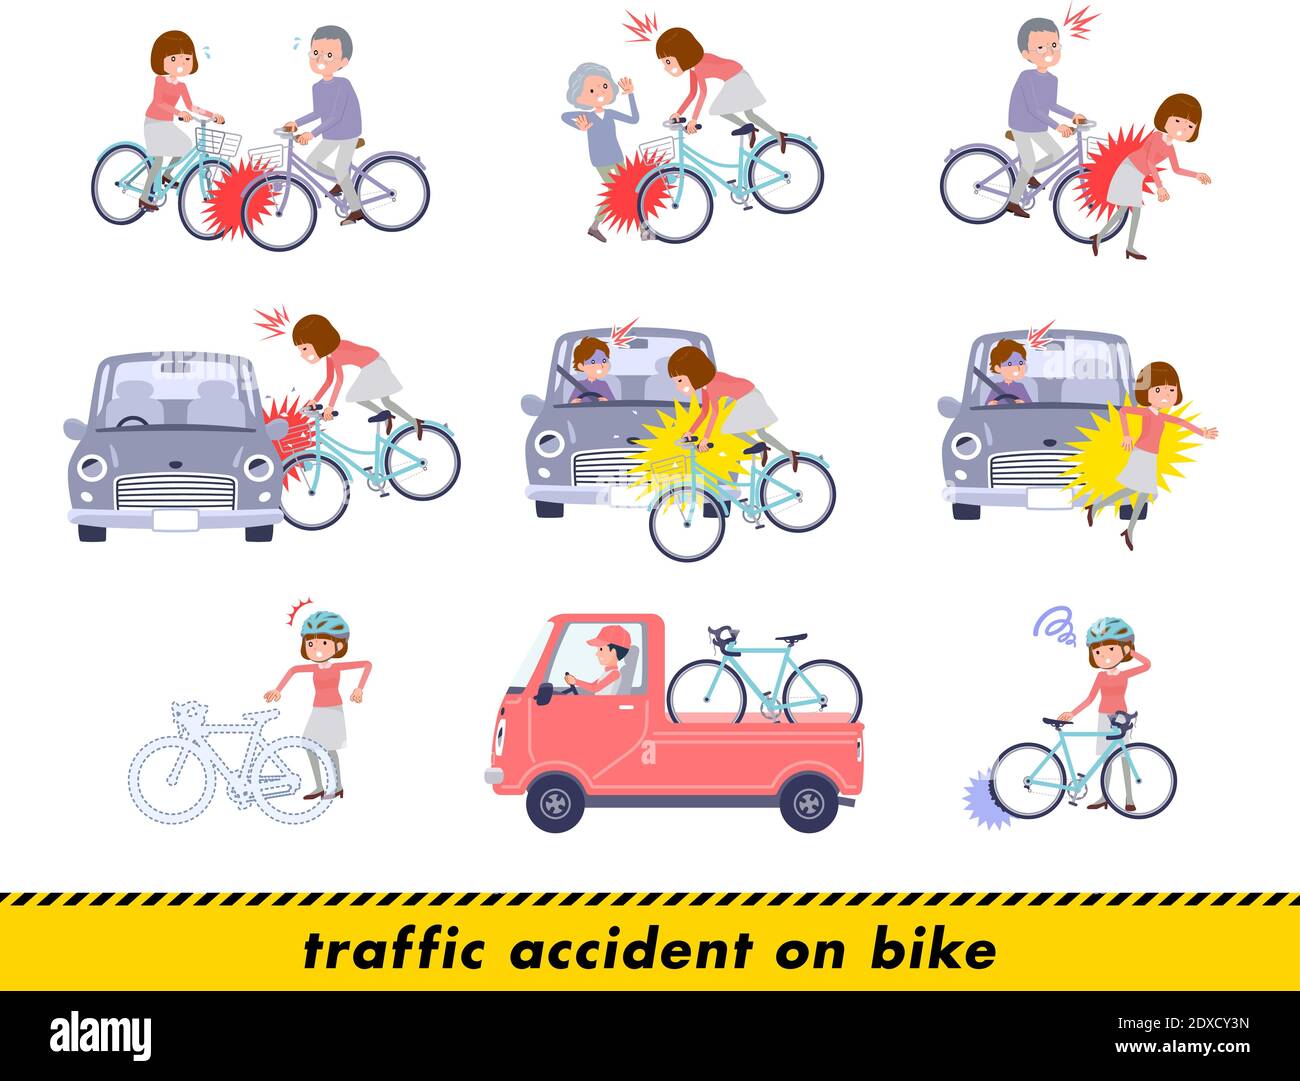 A set of women in a bicycle accident.It's vector art so easy to edit. Stock Vector